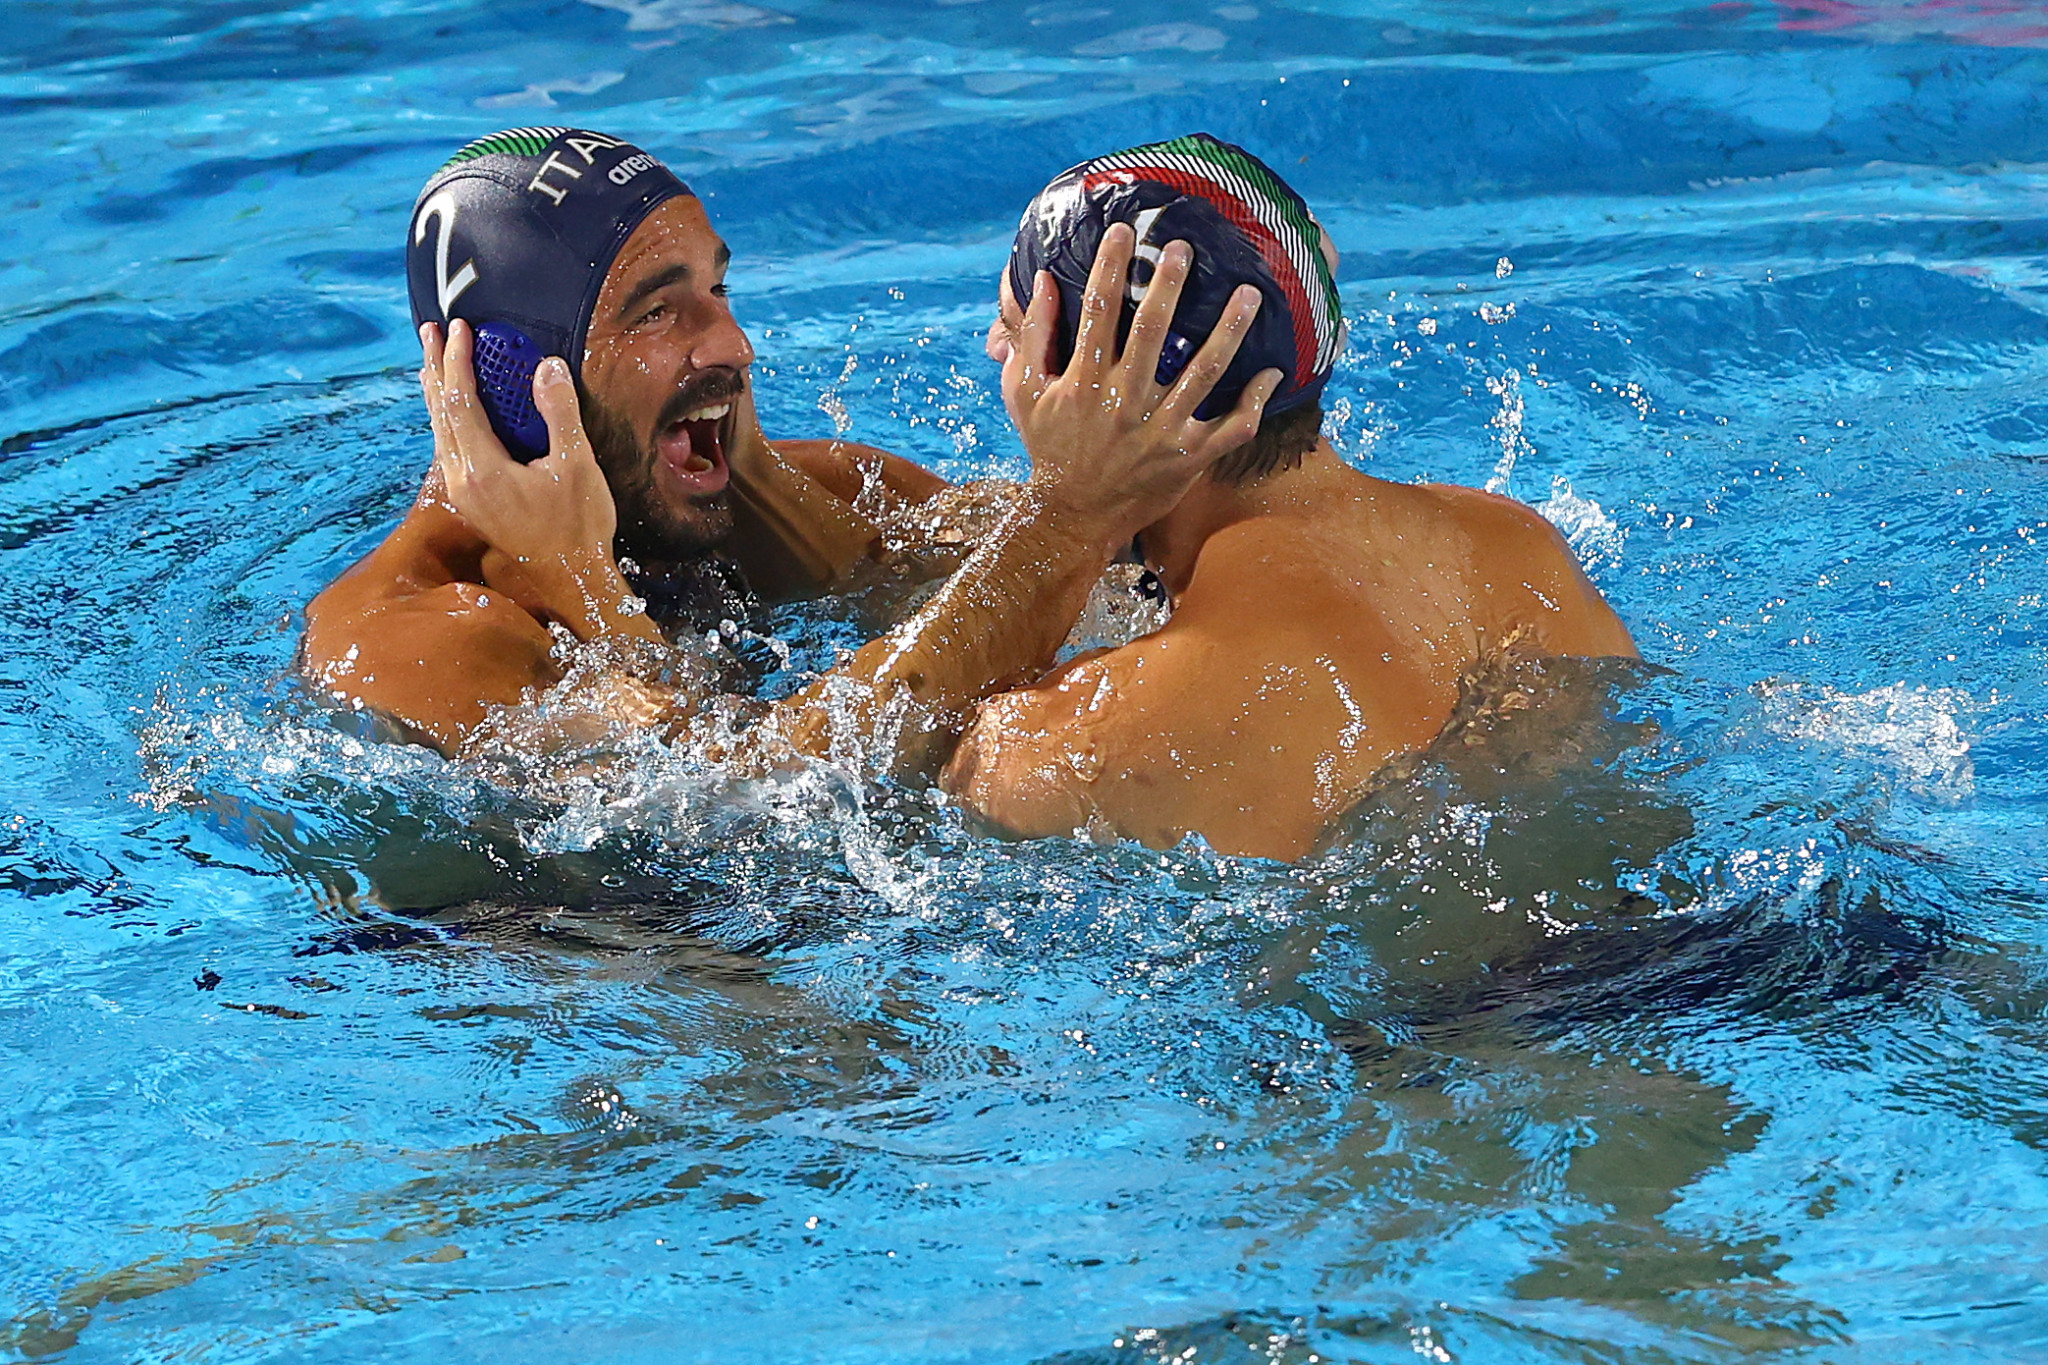 Defending champions Italy beat hosts Hungary in the men's water polo quarter-finals in Budapest ©Getty Images